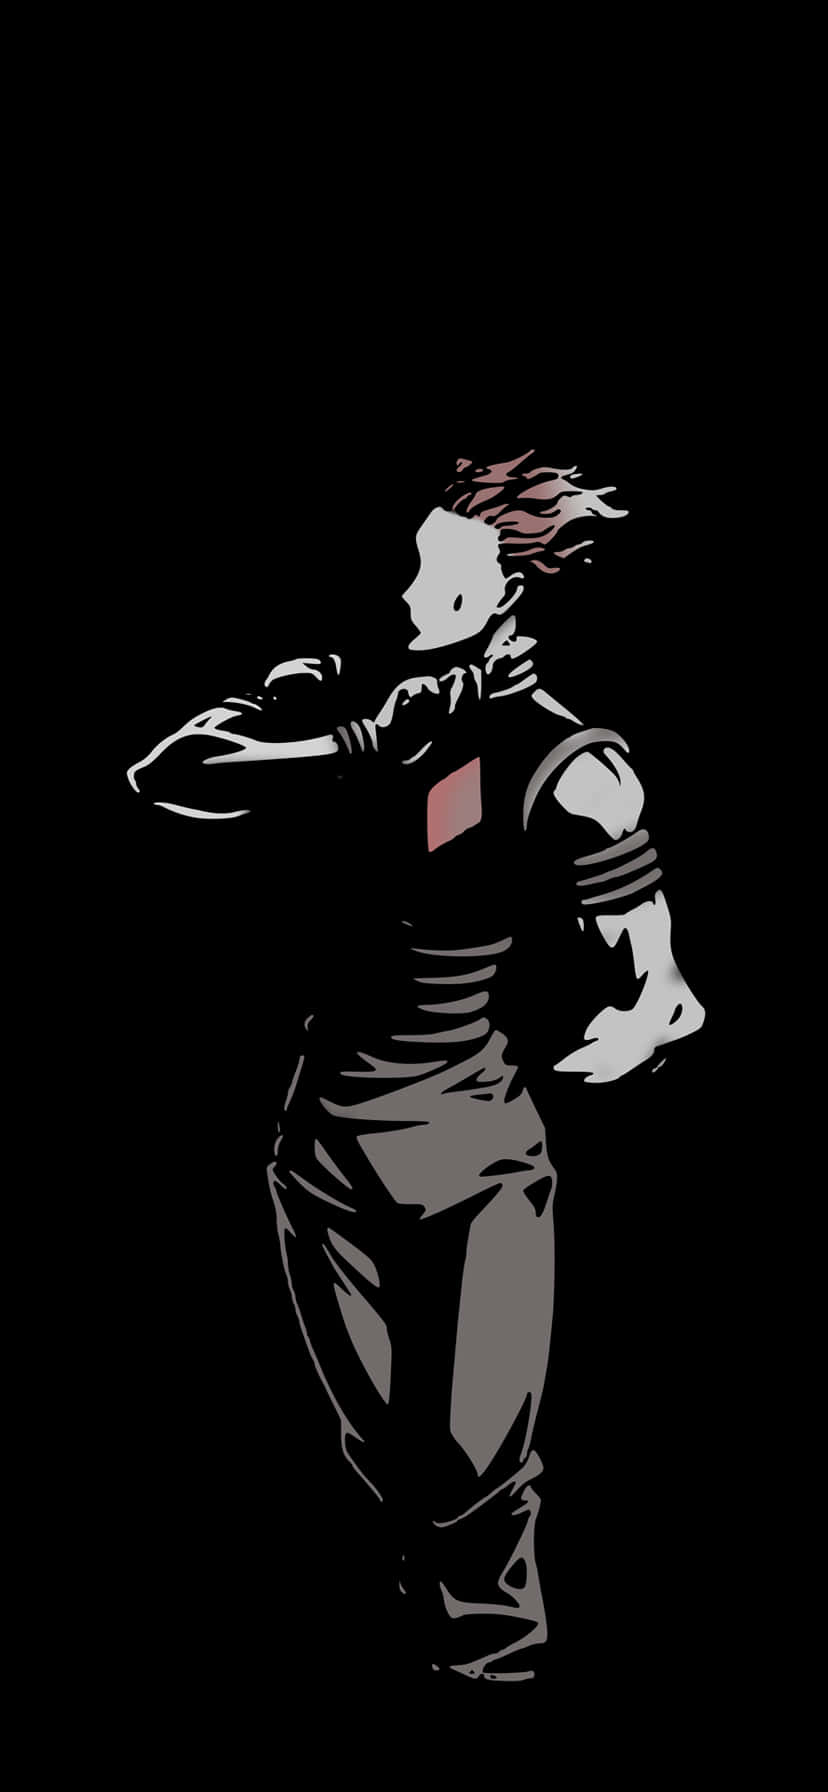 Celebrate the Legendary Hisoka with an Iphone Wallpaper